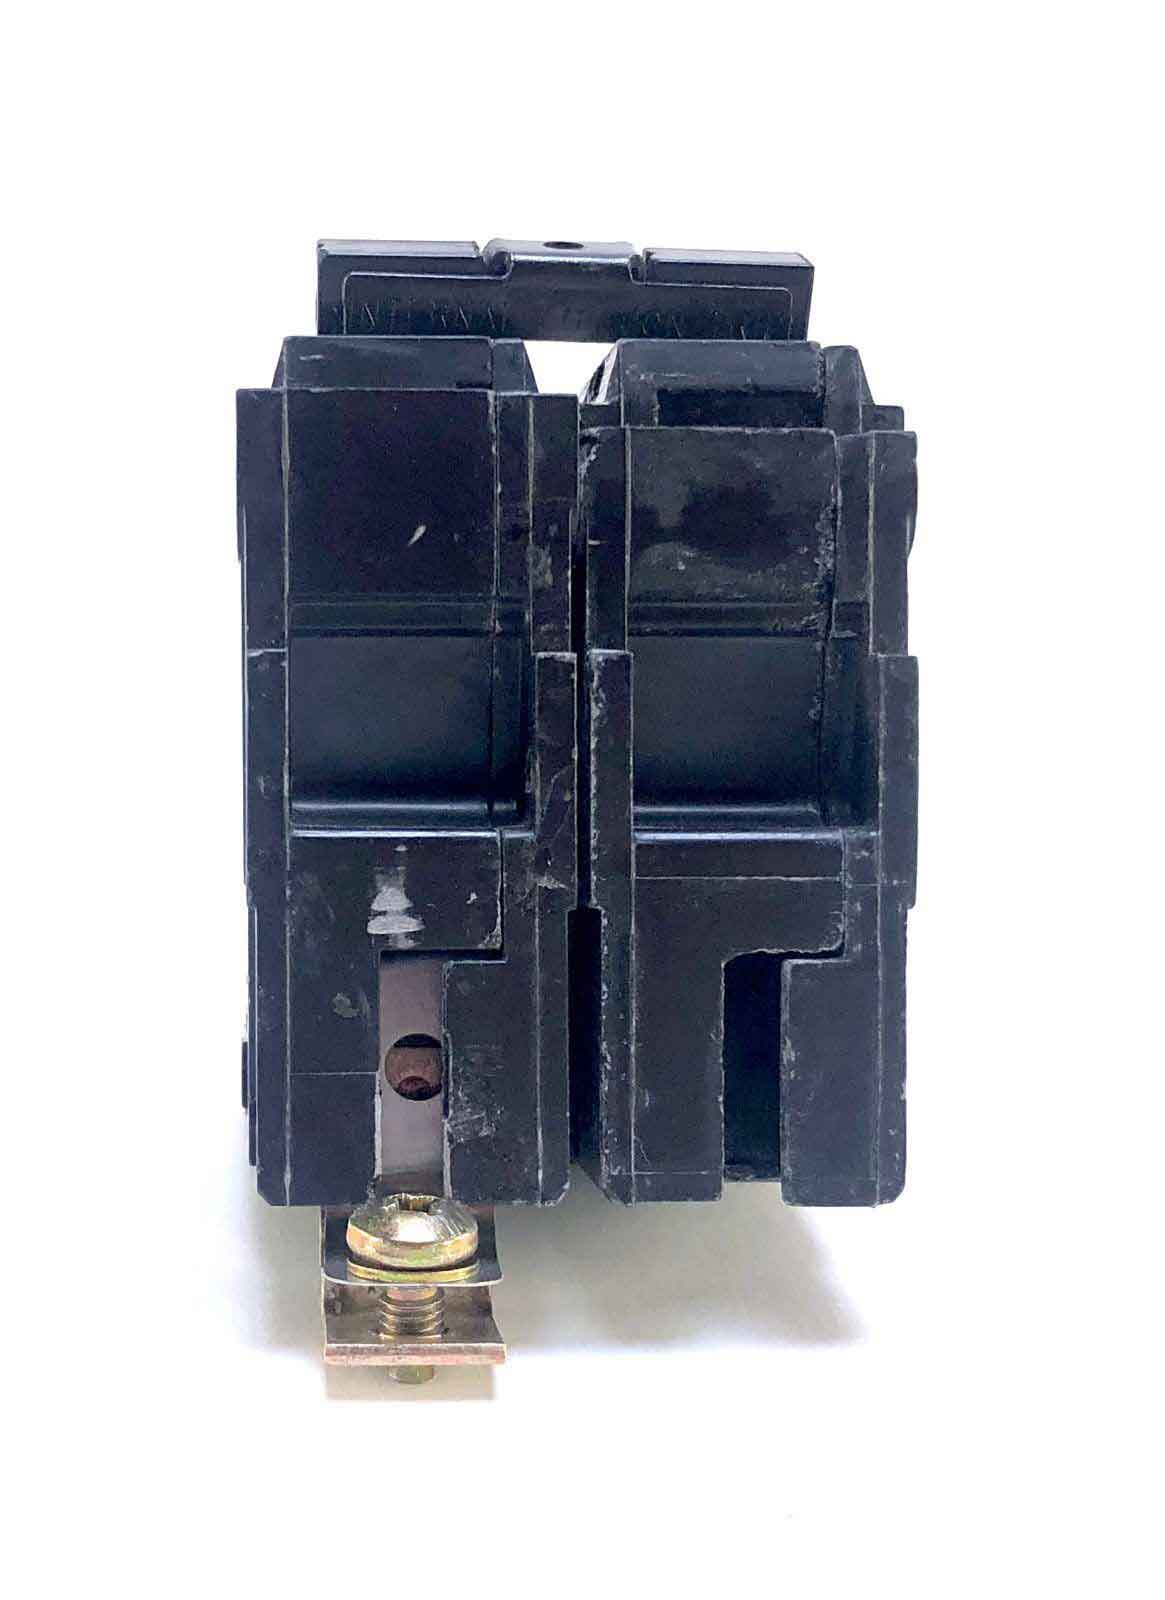 THHQB1120ST1 - General Electrics - Molded Case Circuit Breakers